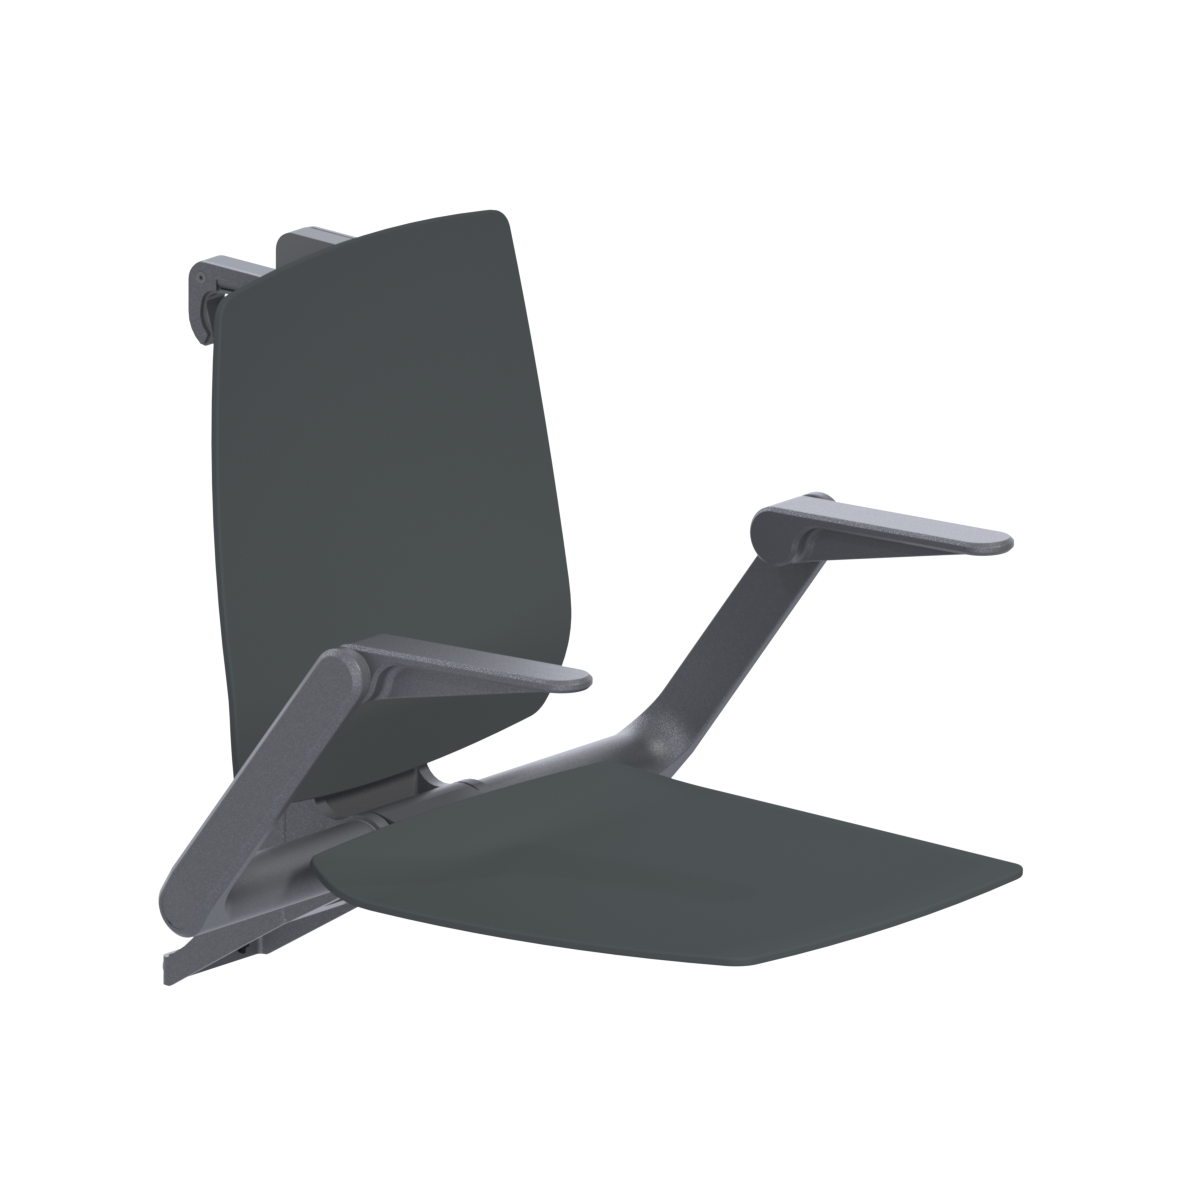 Ascento Hanging seat, with backrest and armrests, for Cavere Care, 584 x 640 x 574 mm, Ascento Dark grey